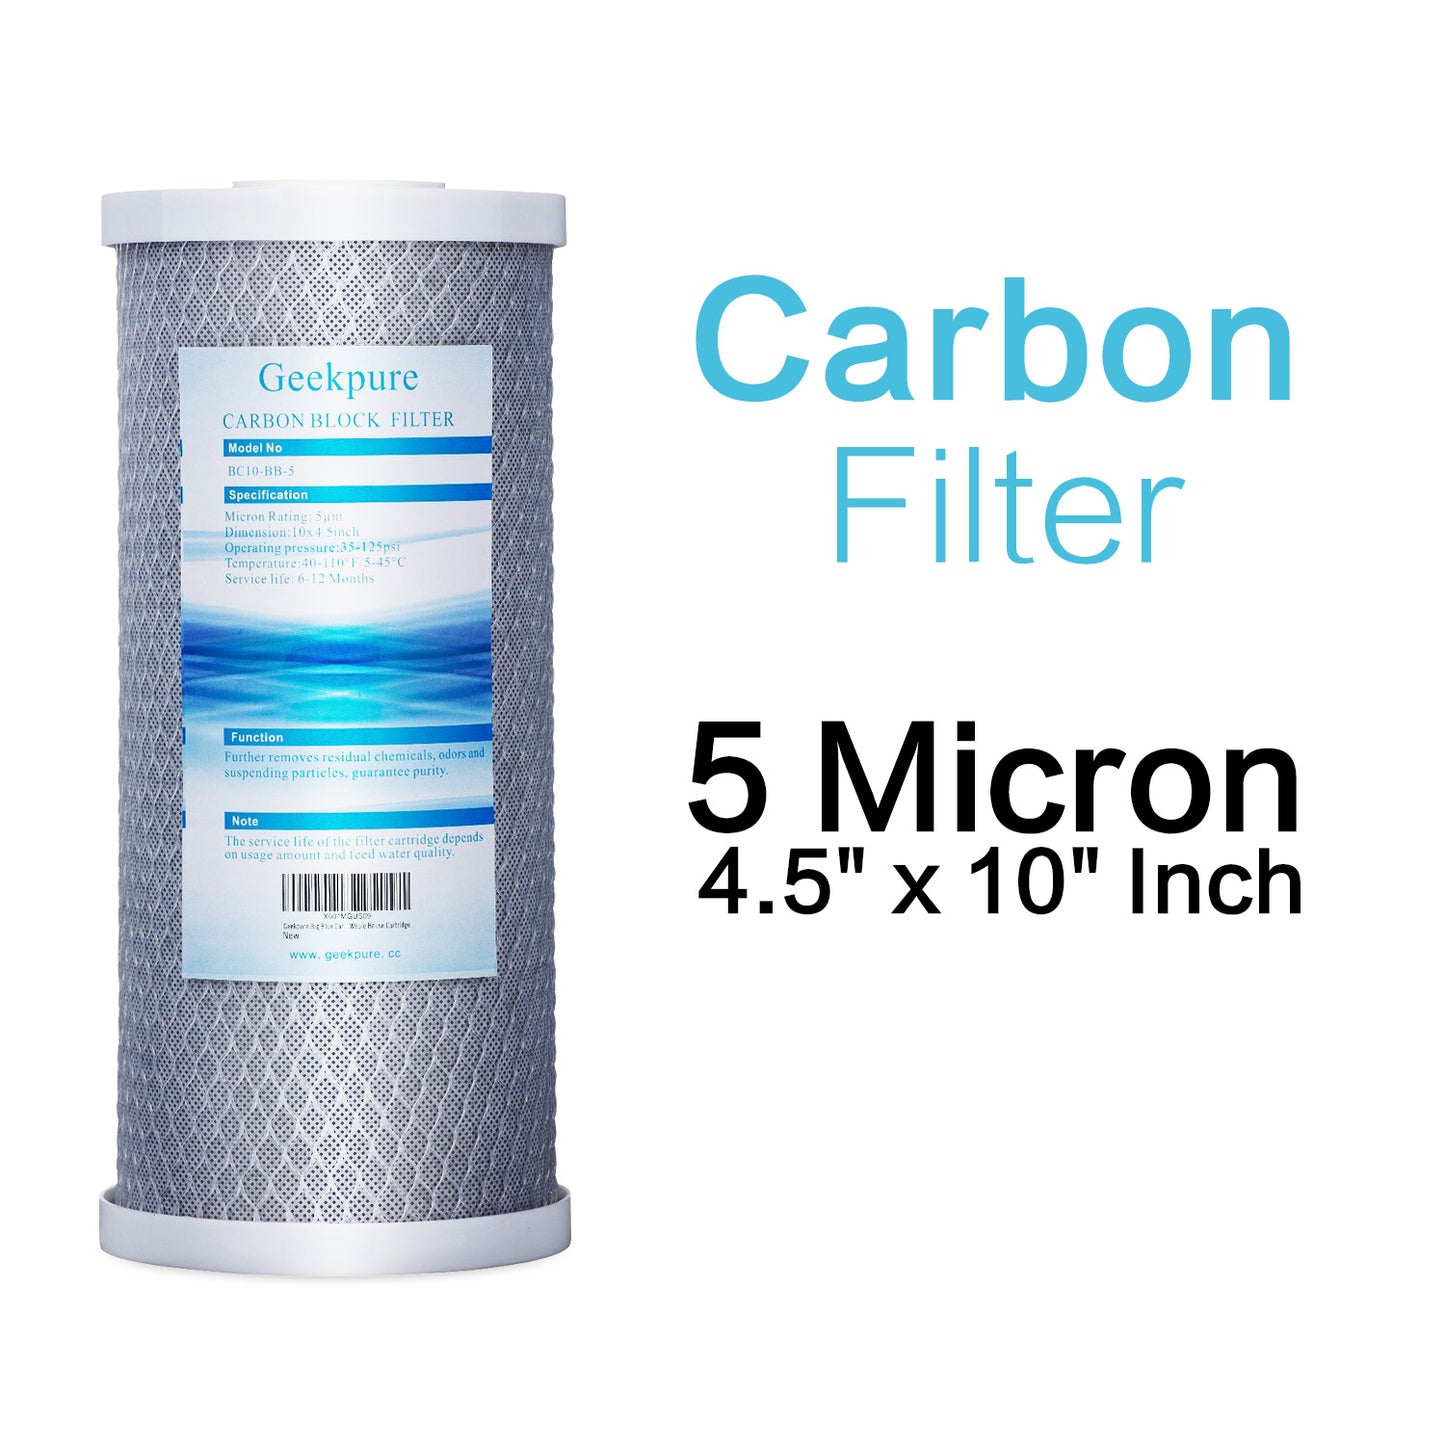 4.5"x 10" PP Sediment and Carbon Block Filters for Whole House Water Filtration -Pack 4